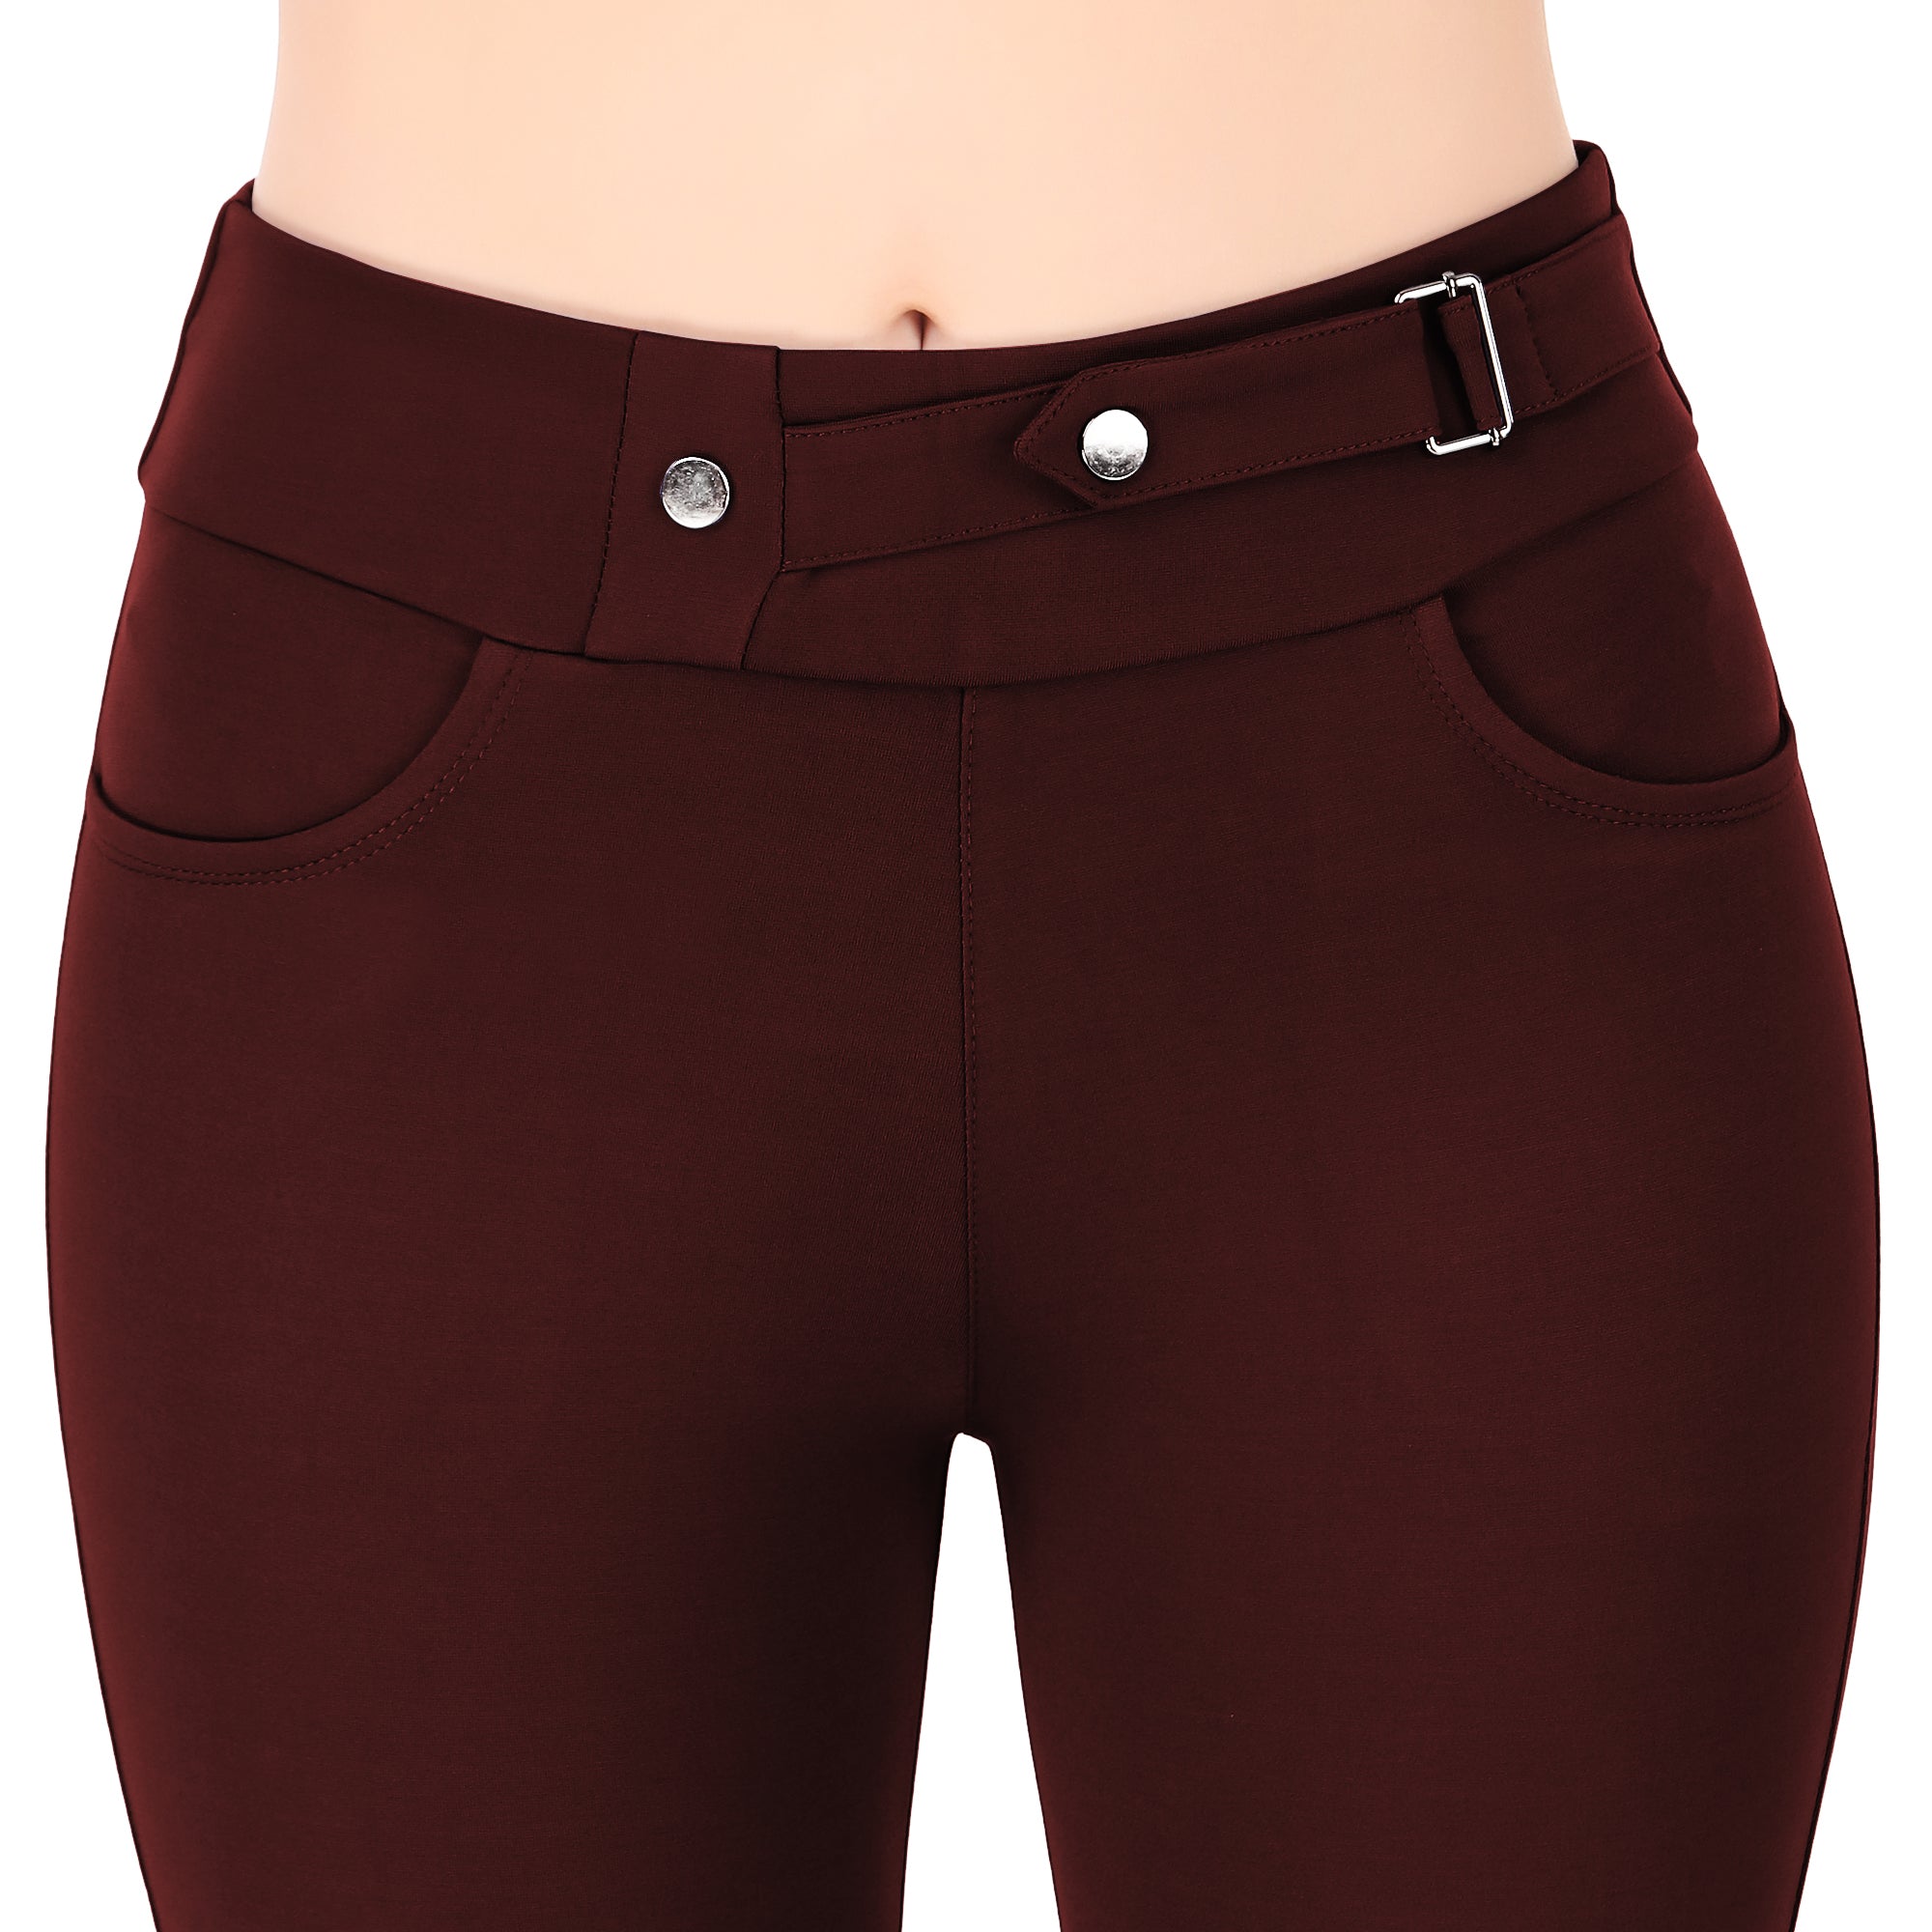 Most Comfortable Women's Mid-Waist Jeggings with 2 Front Pockets - Maroon 